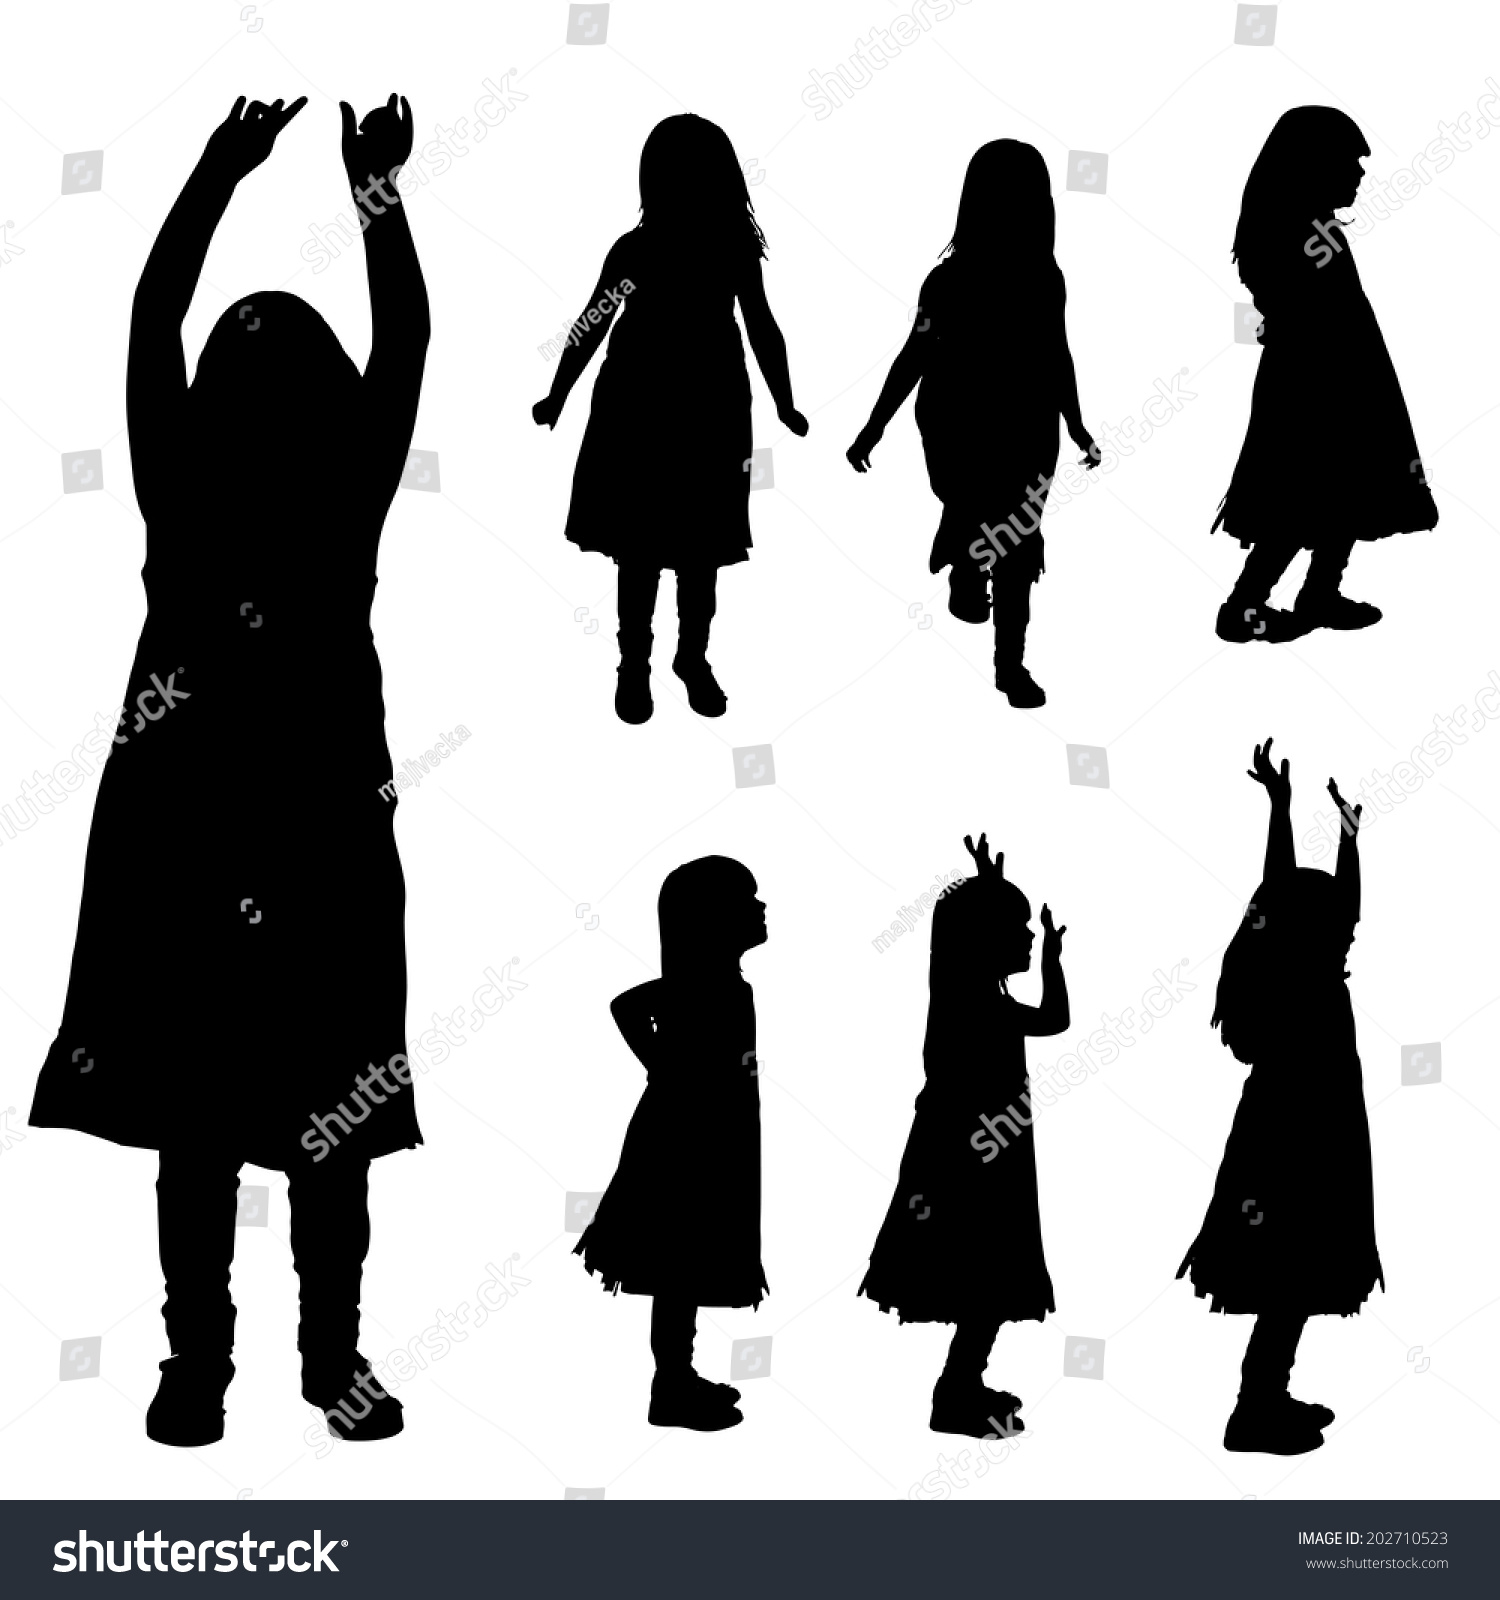 Vector Silhouette Of Girl On A White Background. - 202710523 : Shutterstock